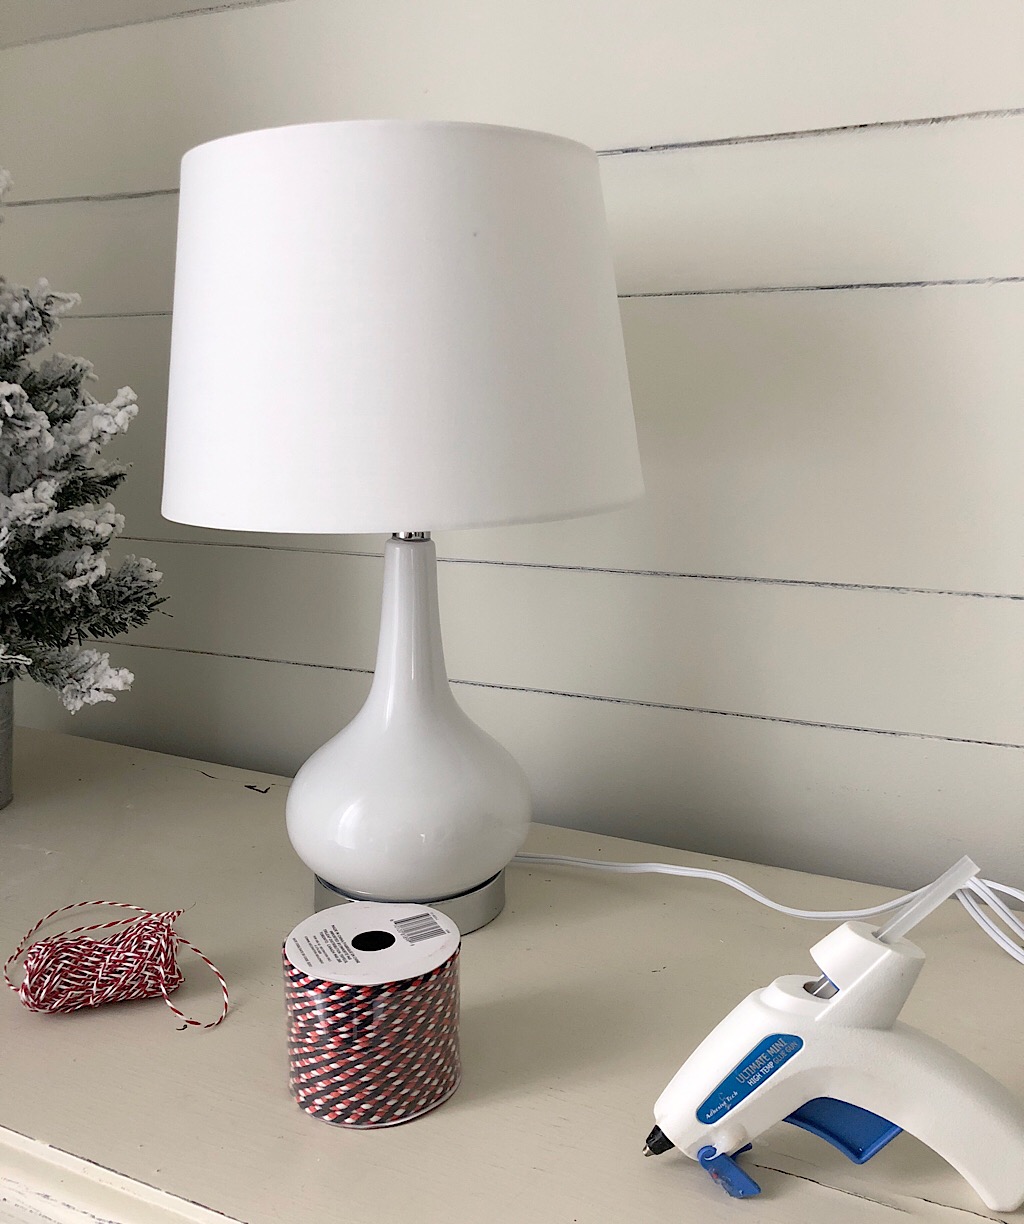 Make Your Perfect Bed -Bed Bath and Beyond lamp hack